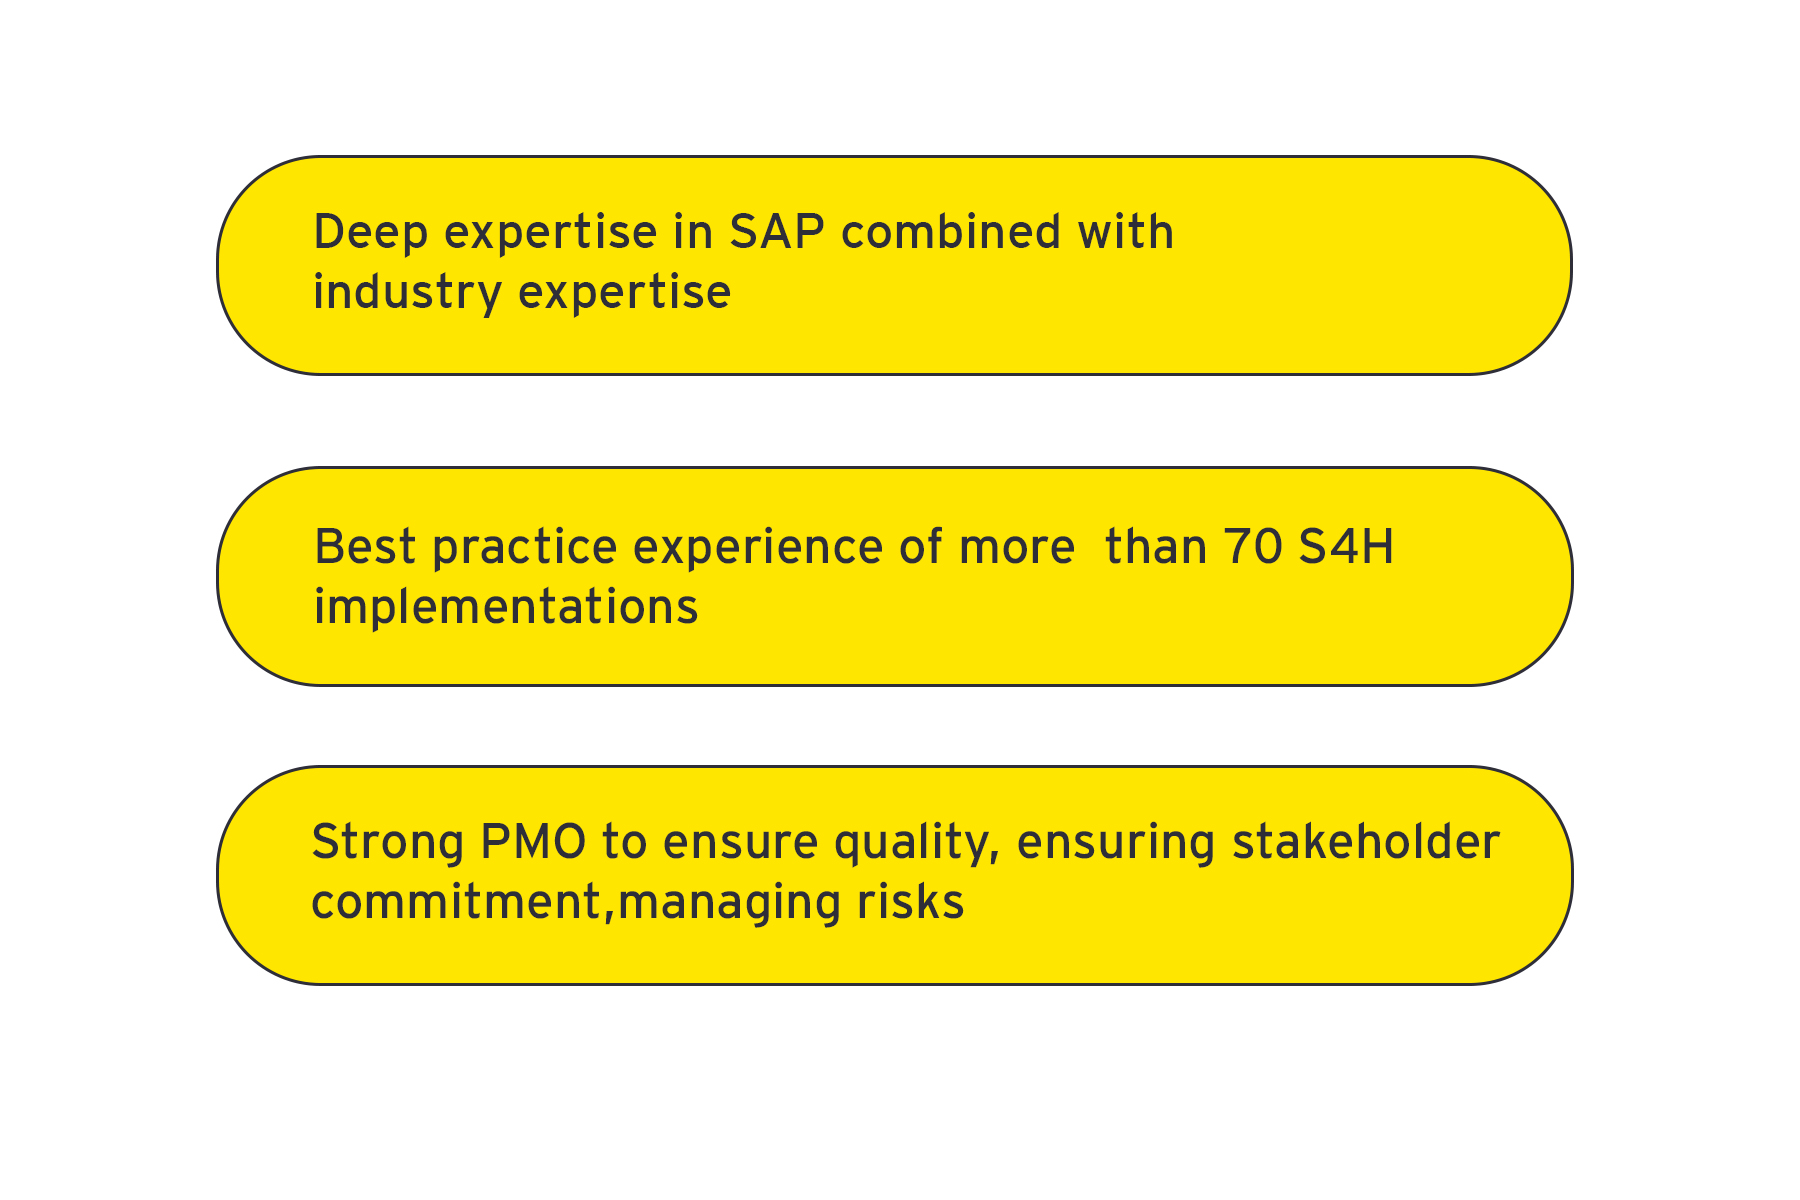 Capabilities to implement SAP ERP at a manufacturing company